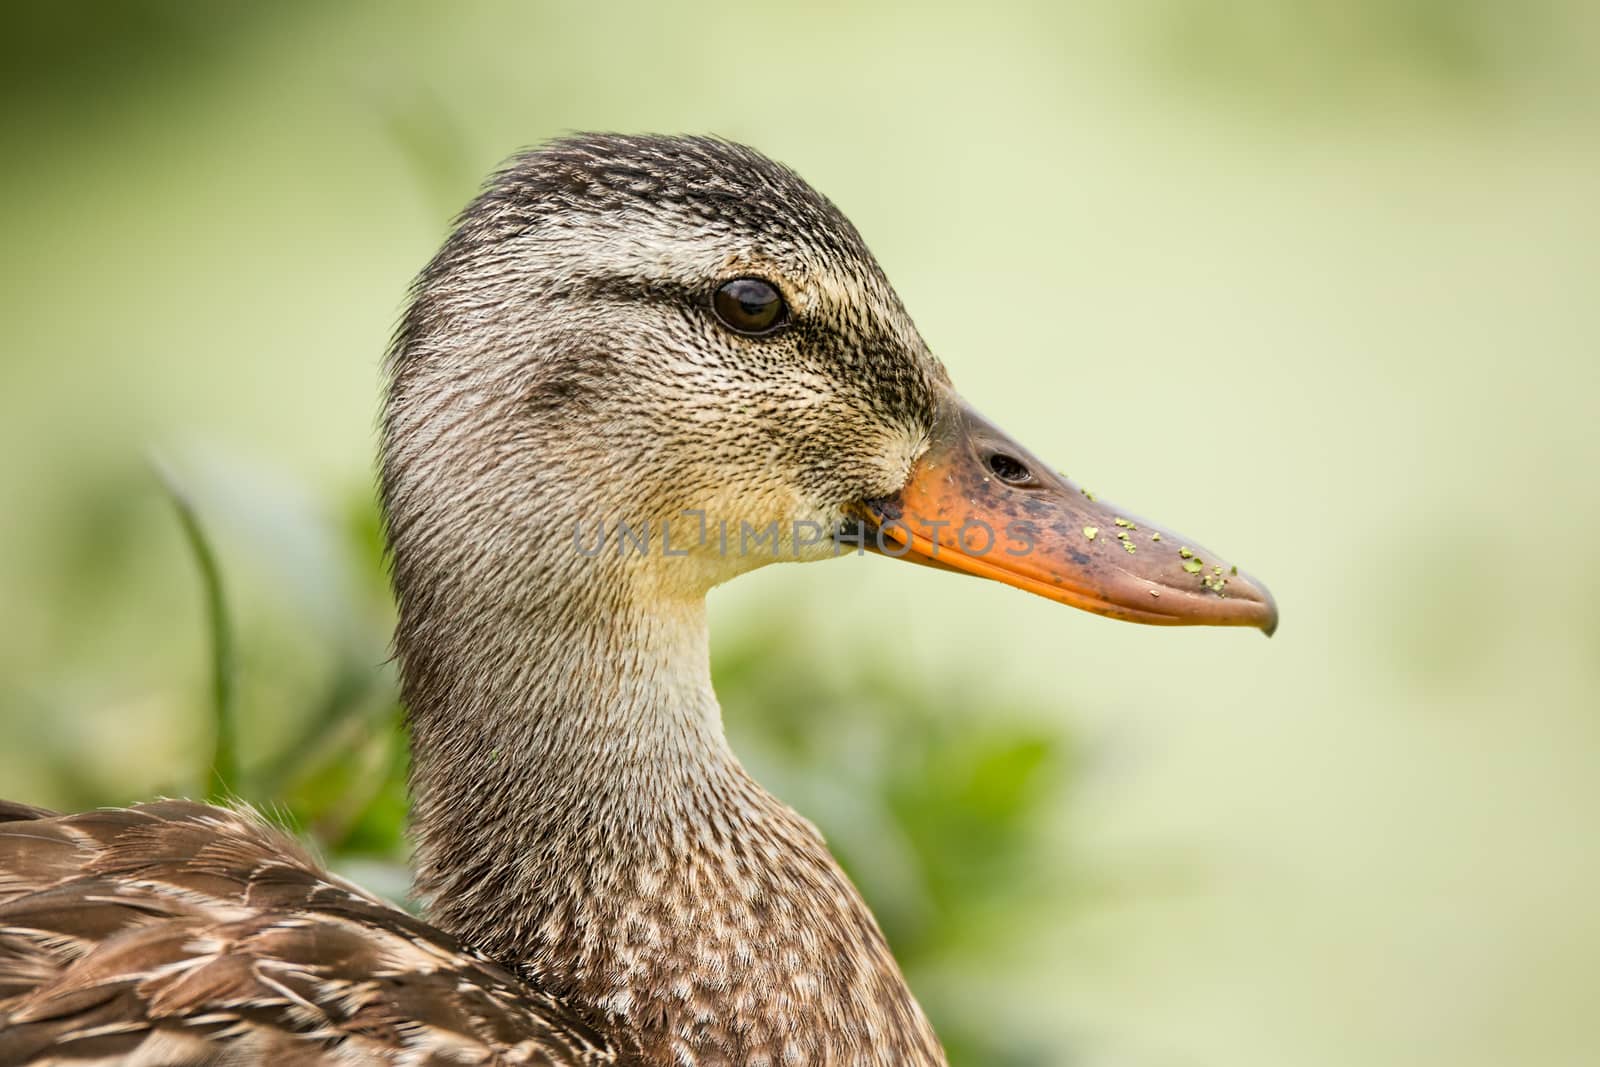 Female Duck Profile With Green Plantlife in the Background by backyard_photography